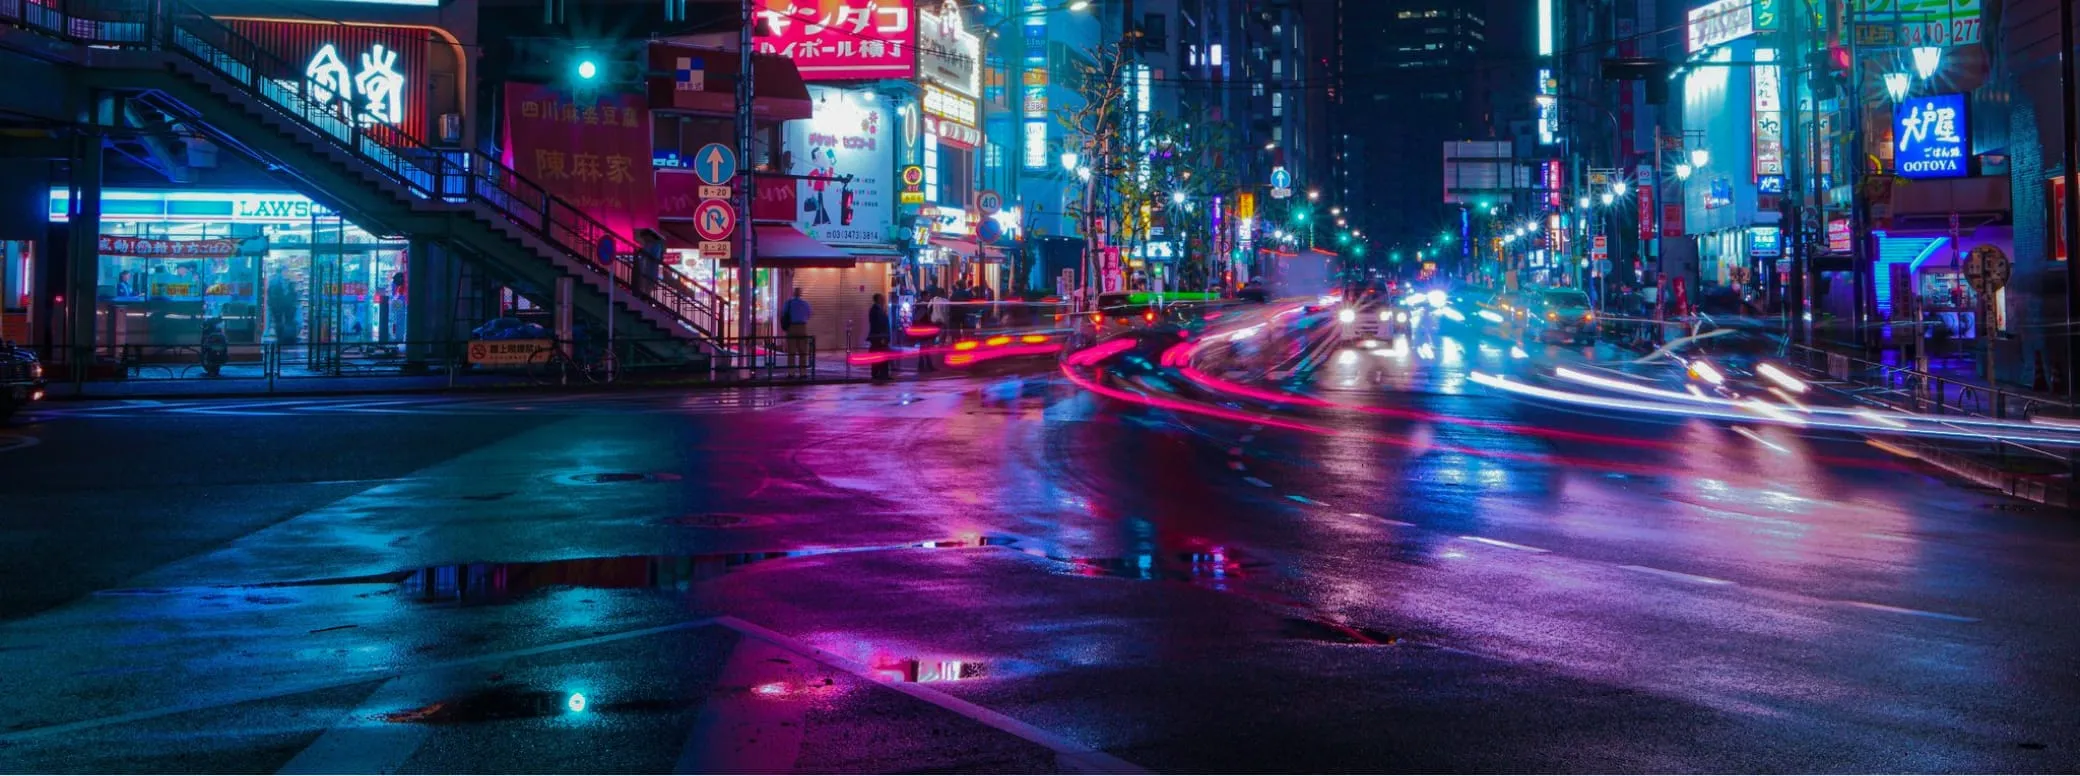 A busy street in Tokyo at night